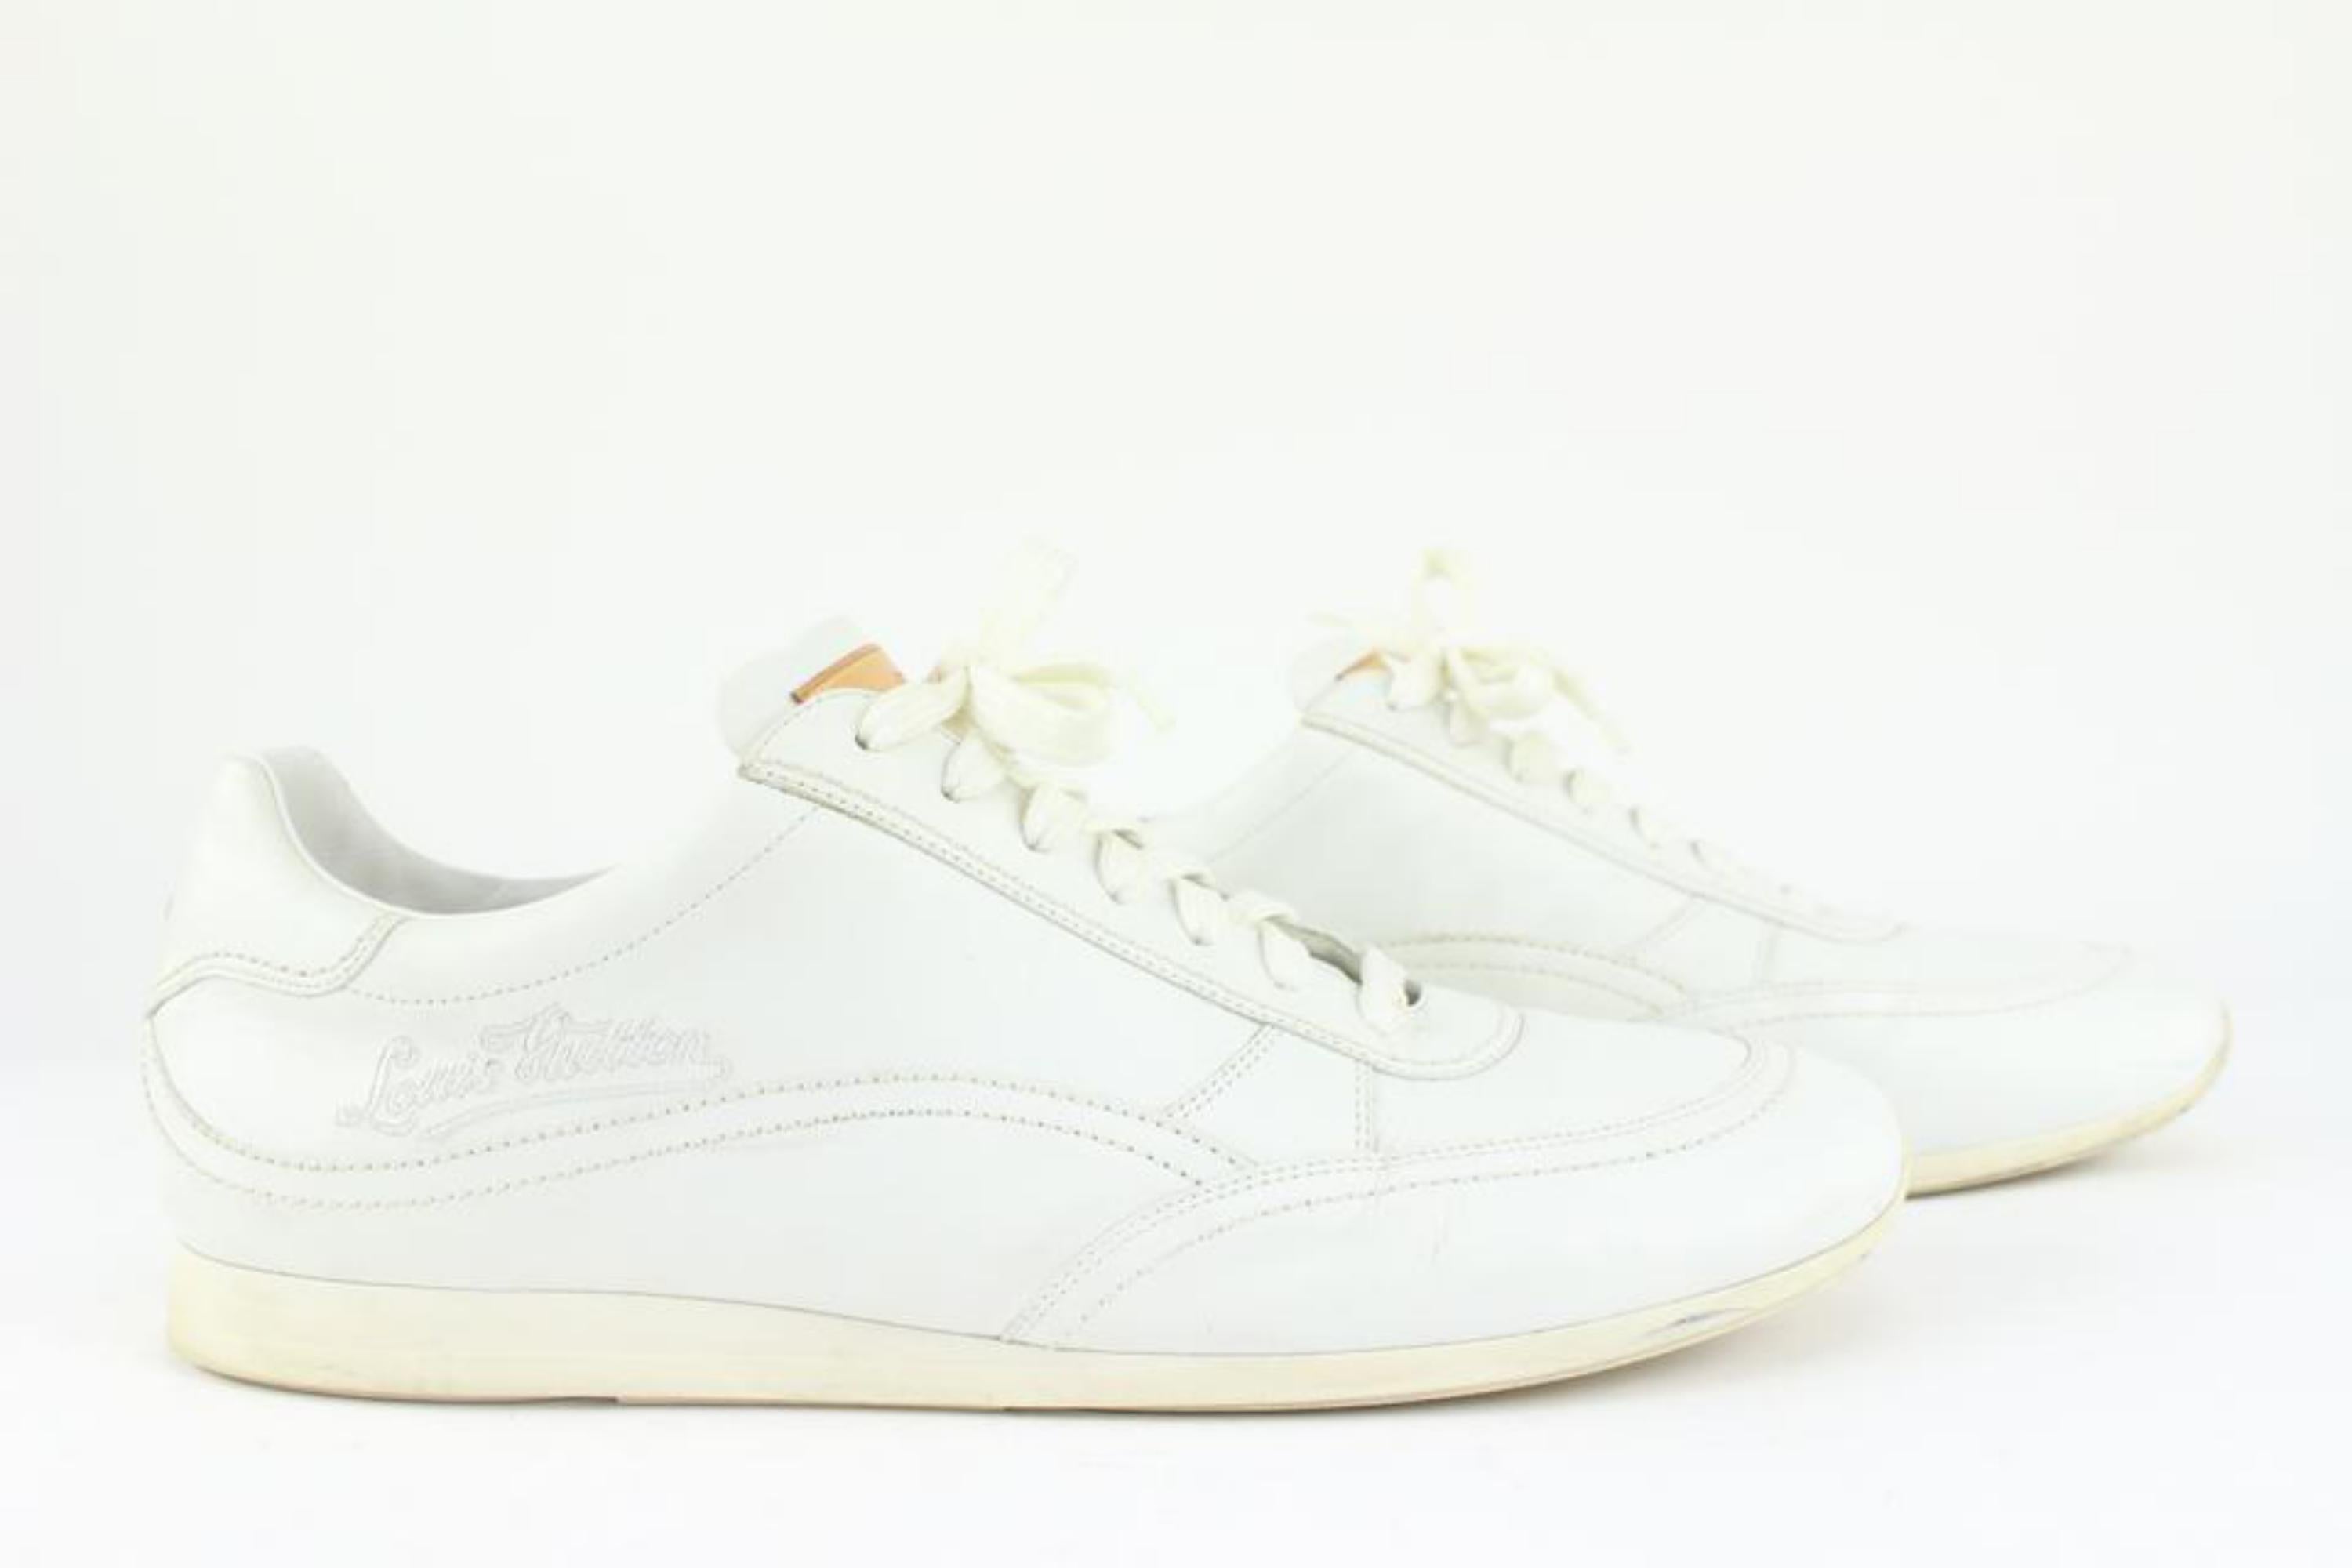 Louis Vuitton Rare Men's 10.5 US White Sneaker 5L1228 In Good Condition For Sale In Dix hills, NY